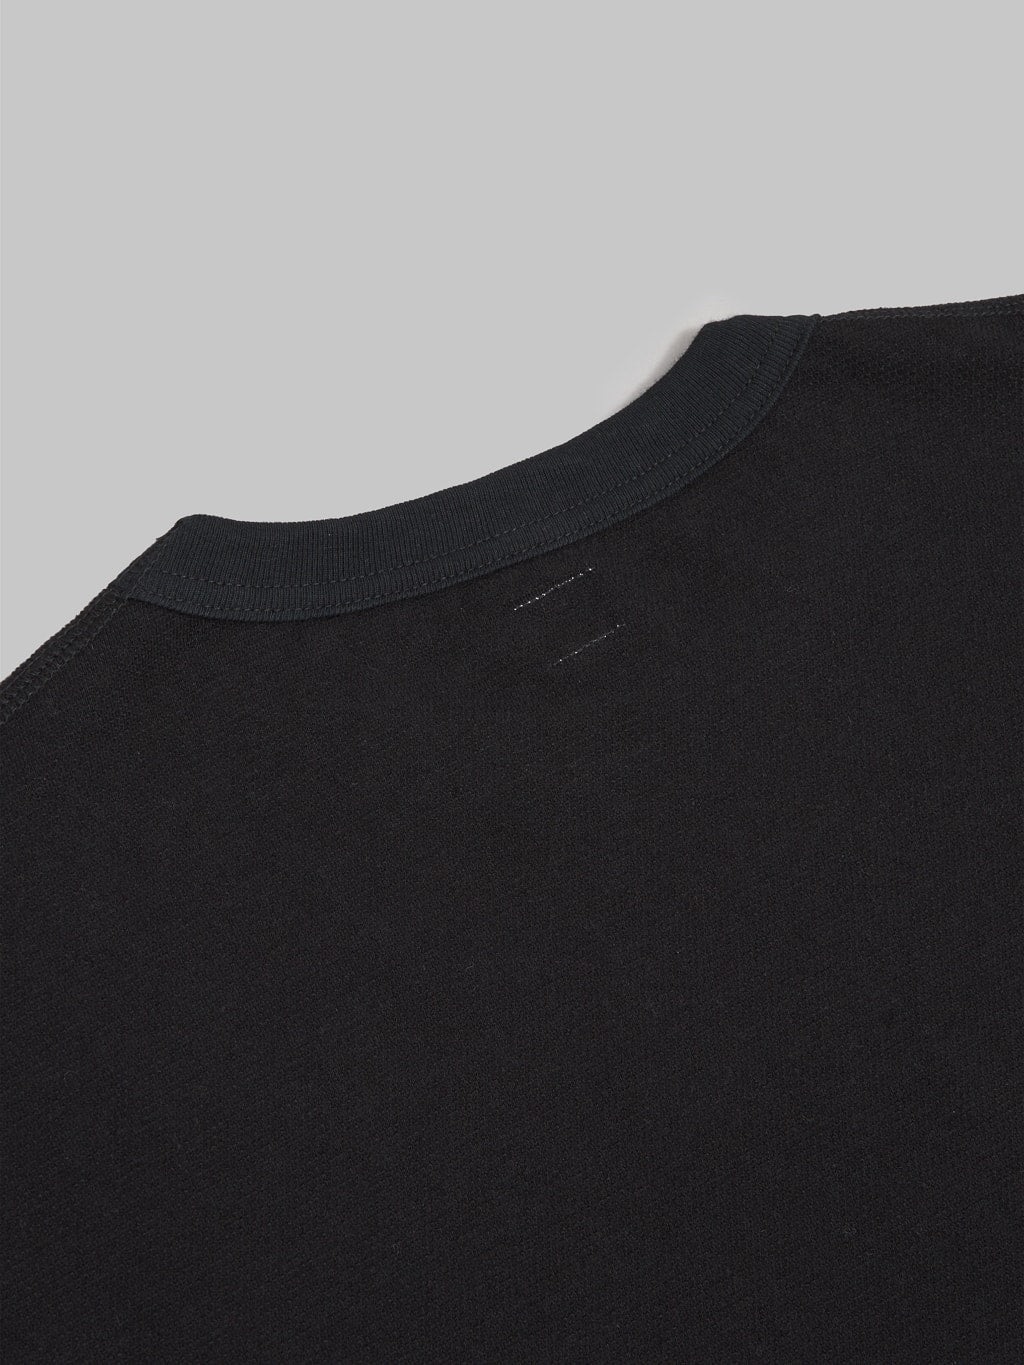 Trophy Clothing Utility Mil Tee black 100 cotton